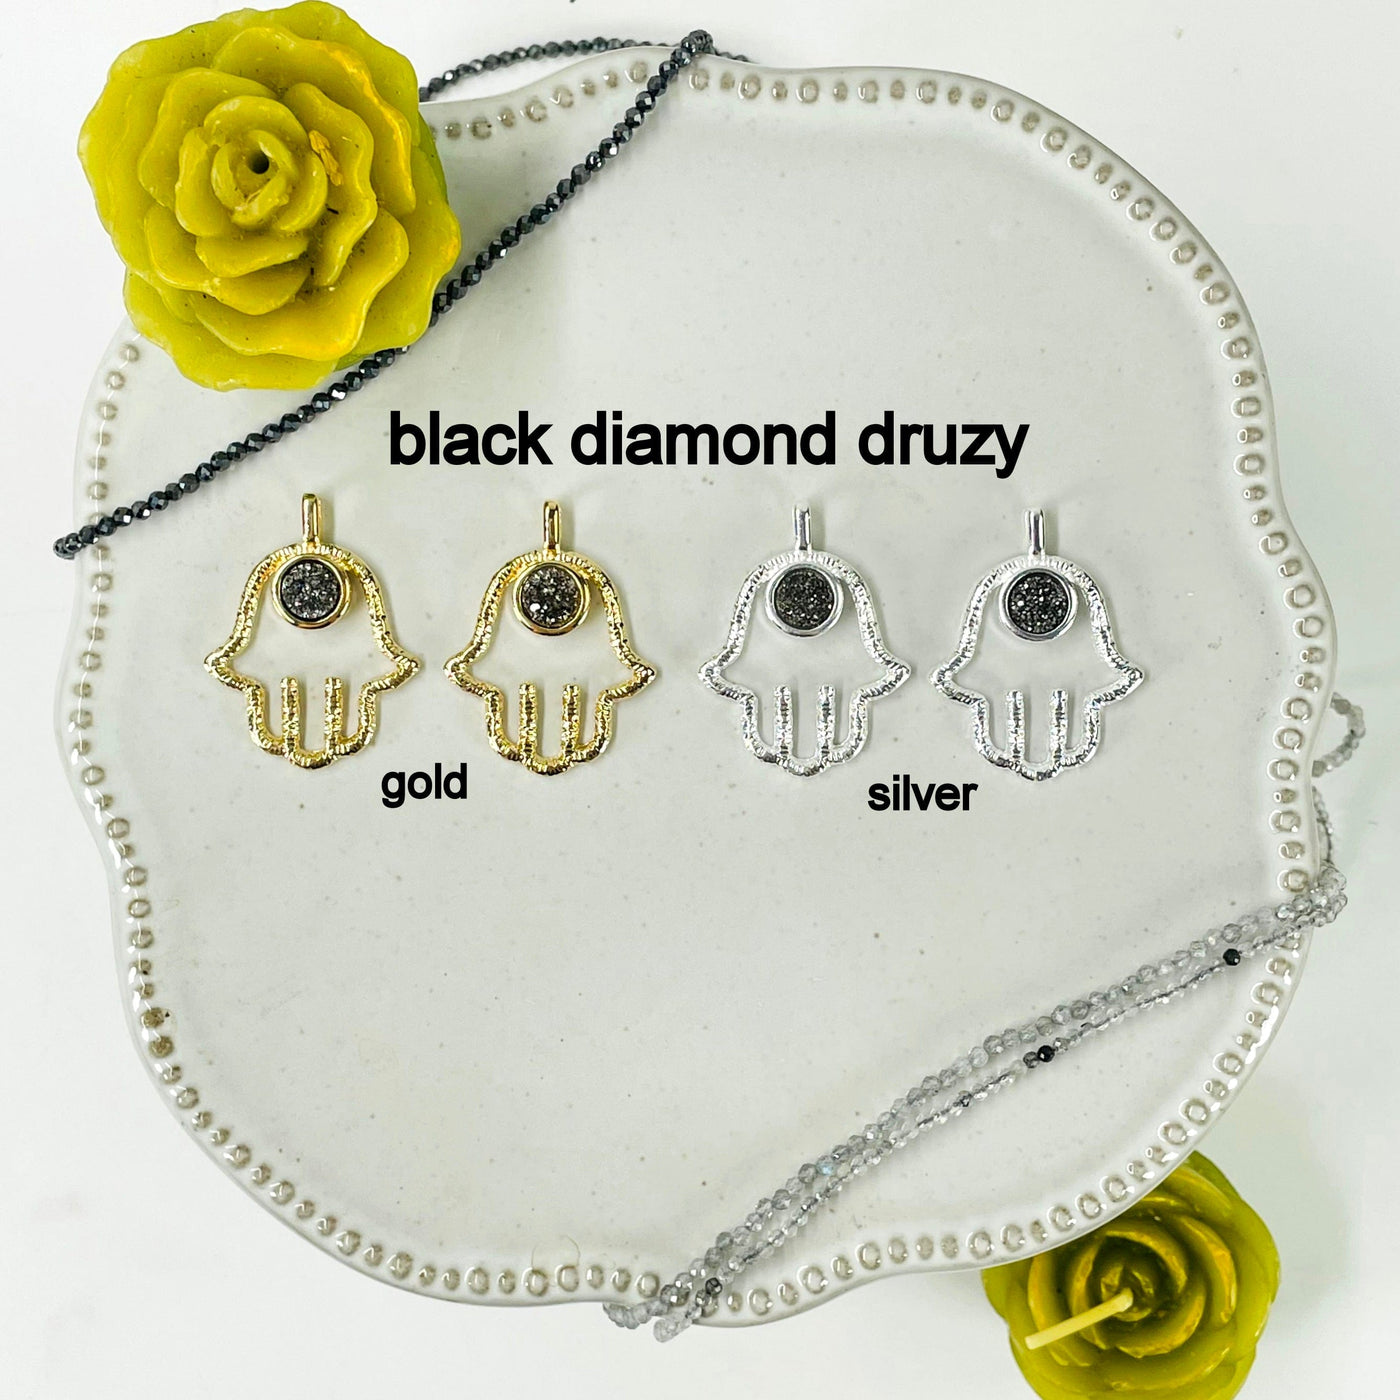 two gold and two silver hamsa hand pendants with black diamond druzy accent